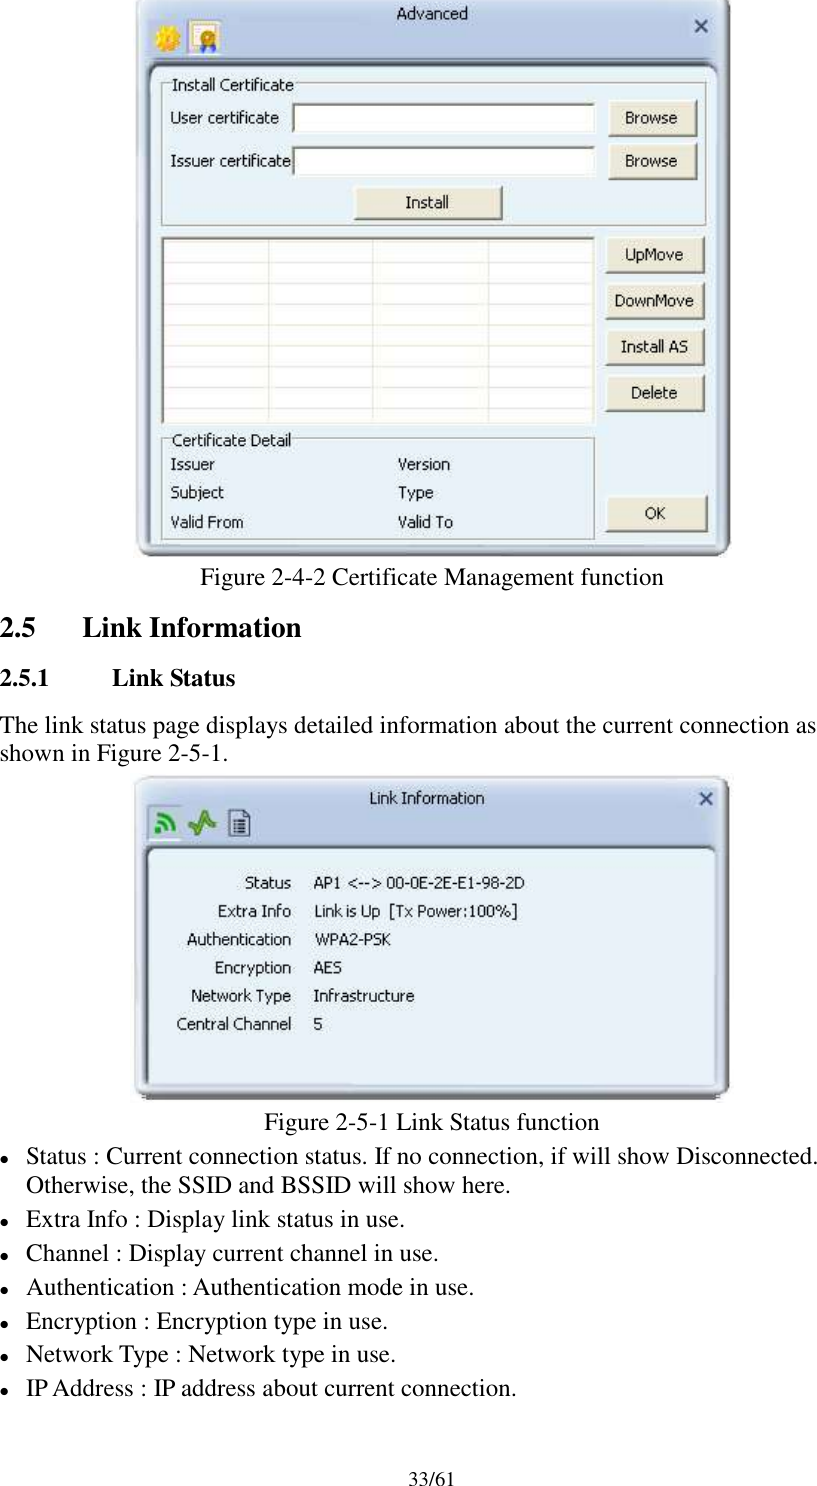 33/61Figure 2-4-2 Certificate Management function2.5 Link Information2.5.1 Link StatusThe link status page displays detailed information about the current connection asshown in Figure 2-5-1.Figure 2-5-1 Link Status functionStatus : Current connection status. If no connection, if will show Disconnected.Otherwise, the SSID and BSSID will show here.Extra Info : Display link status in use.Channel : Display current channel in use.Authentication : Authentication mode in use.Encryption : Encryption type in use.Network Type : Network type in use.IP Address : IP address about current connection.